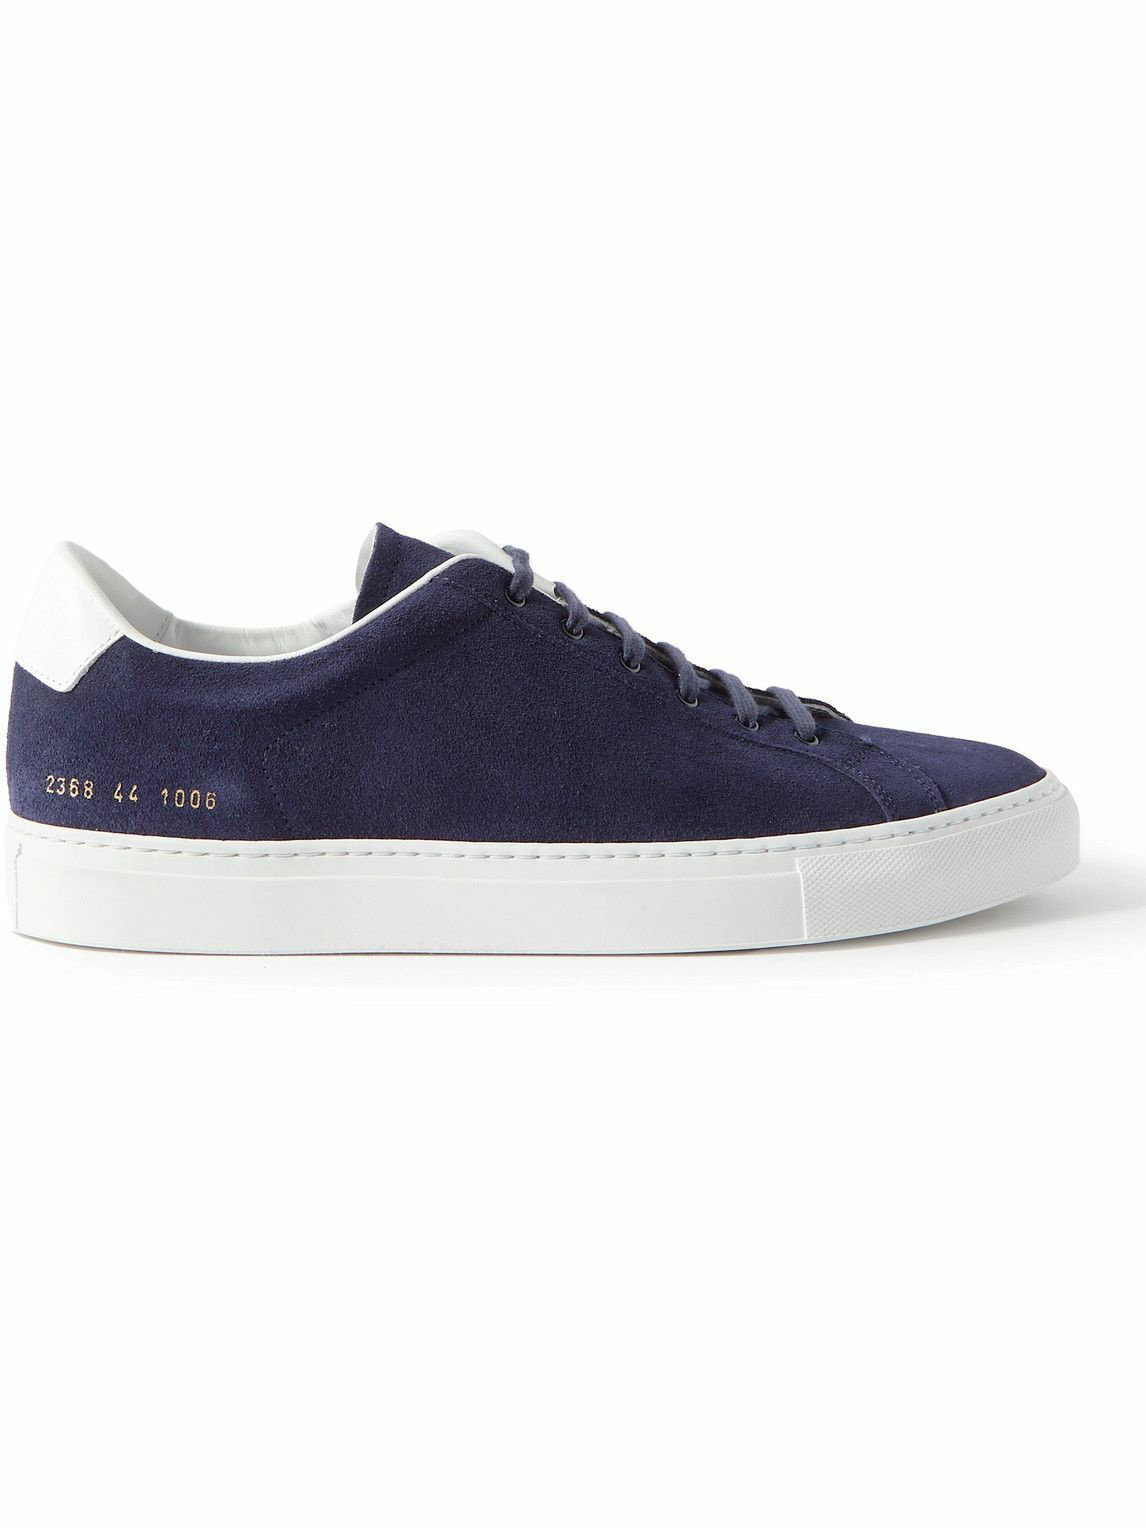 Common Projects - Retro Low Suede Sneakers - Blue Common Projects